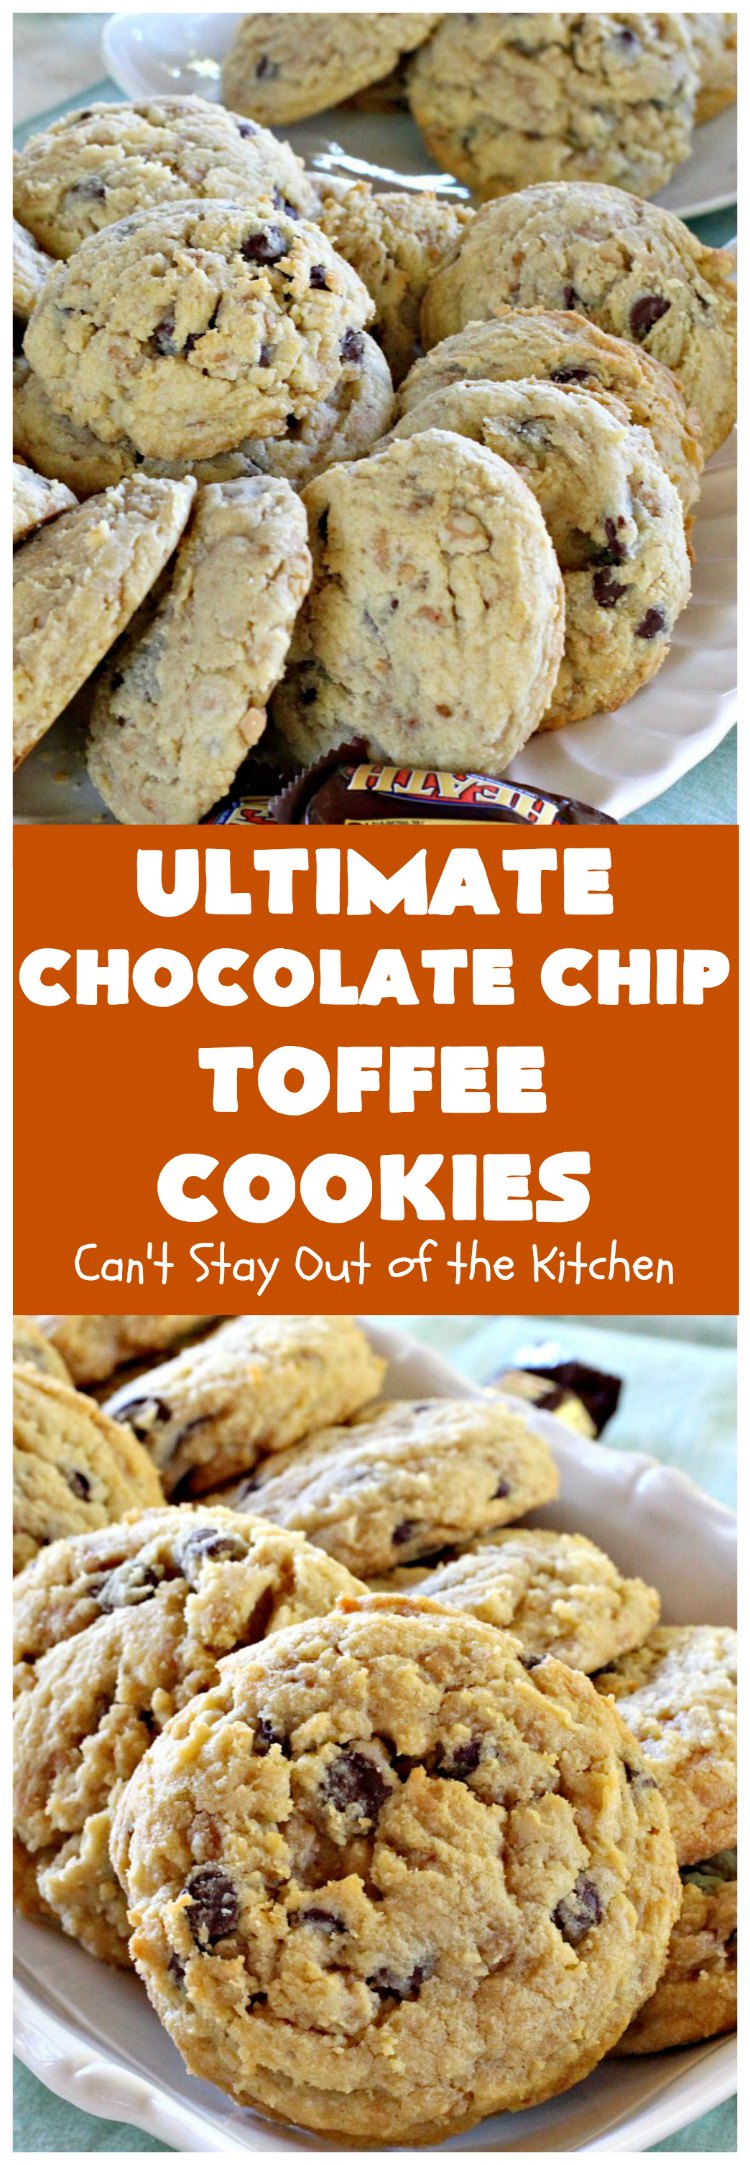 Ultimate Chocolate Chip Toffee Cookies | Can't Stay Out of the Kitchen